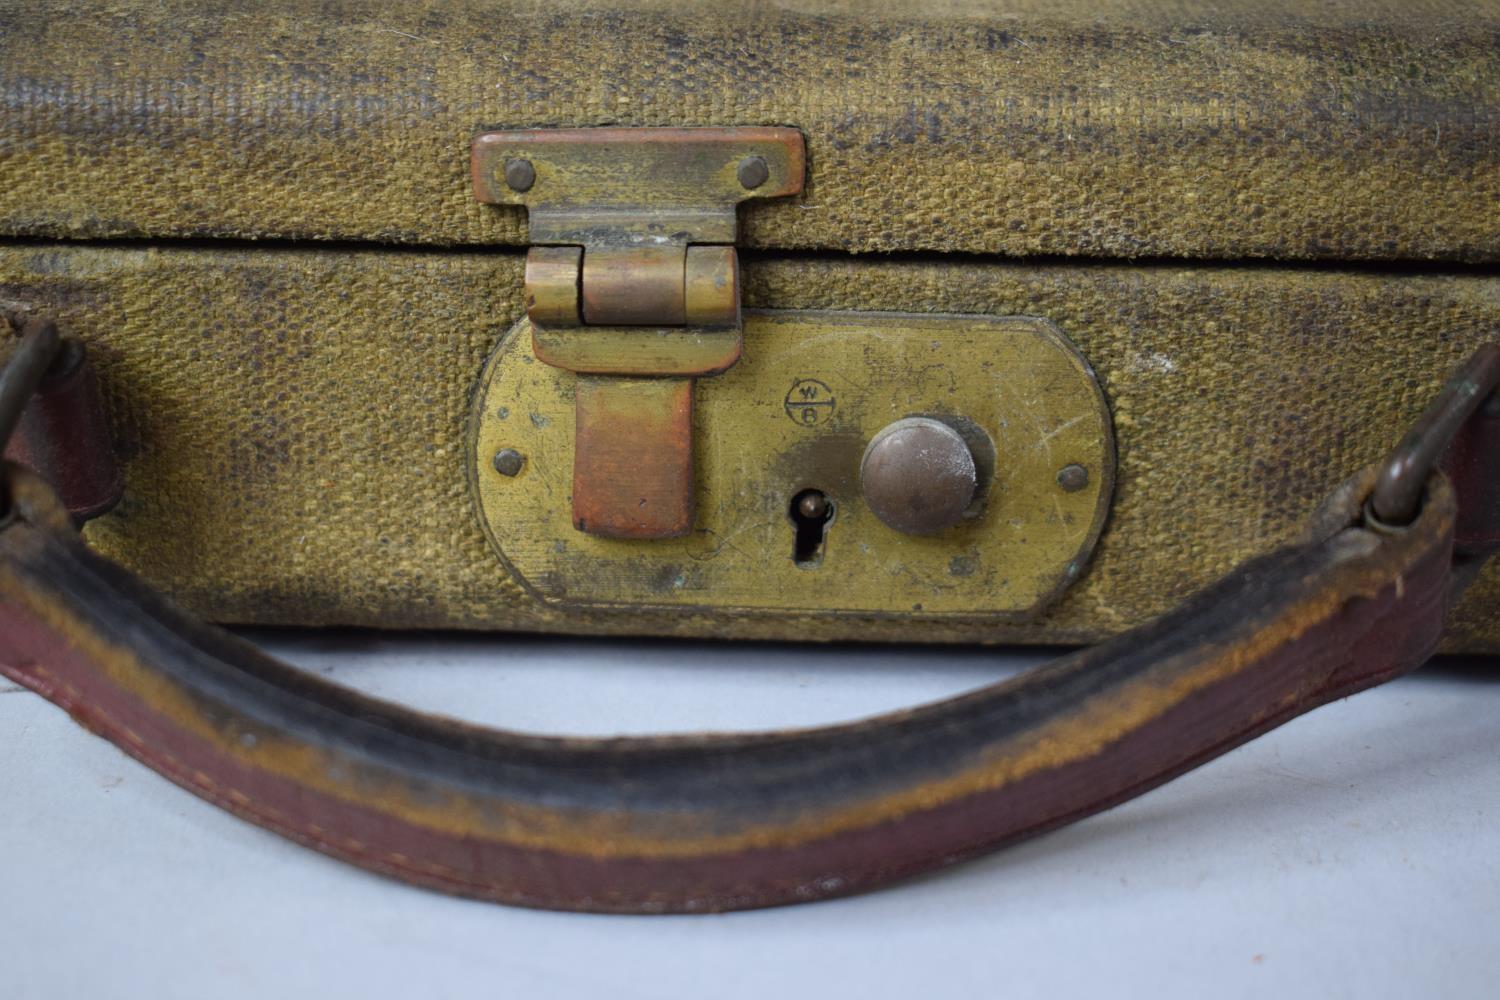 A Vintage Canvas Shotgun Case with Leather Straps and Carrying Handle (In Need of Attention) 76cms - Image 2 of 3